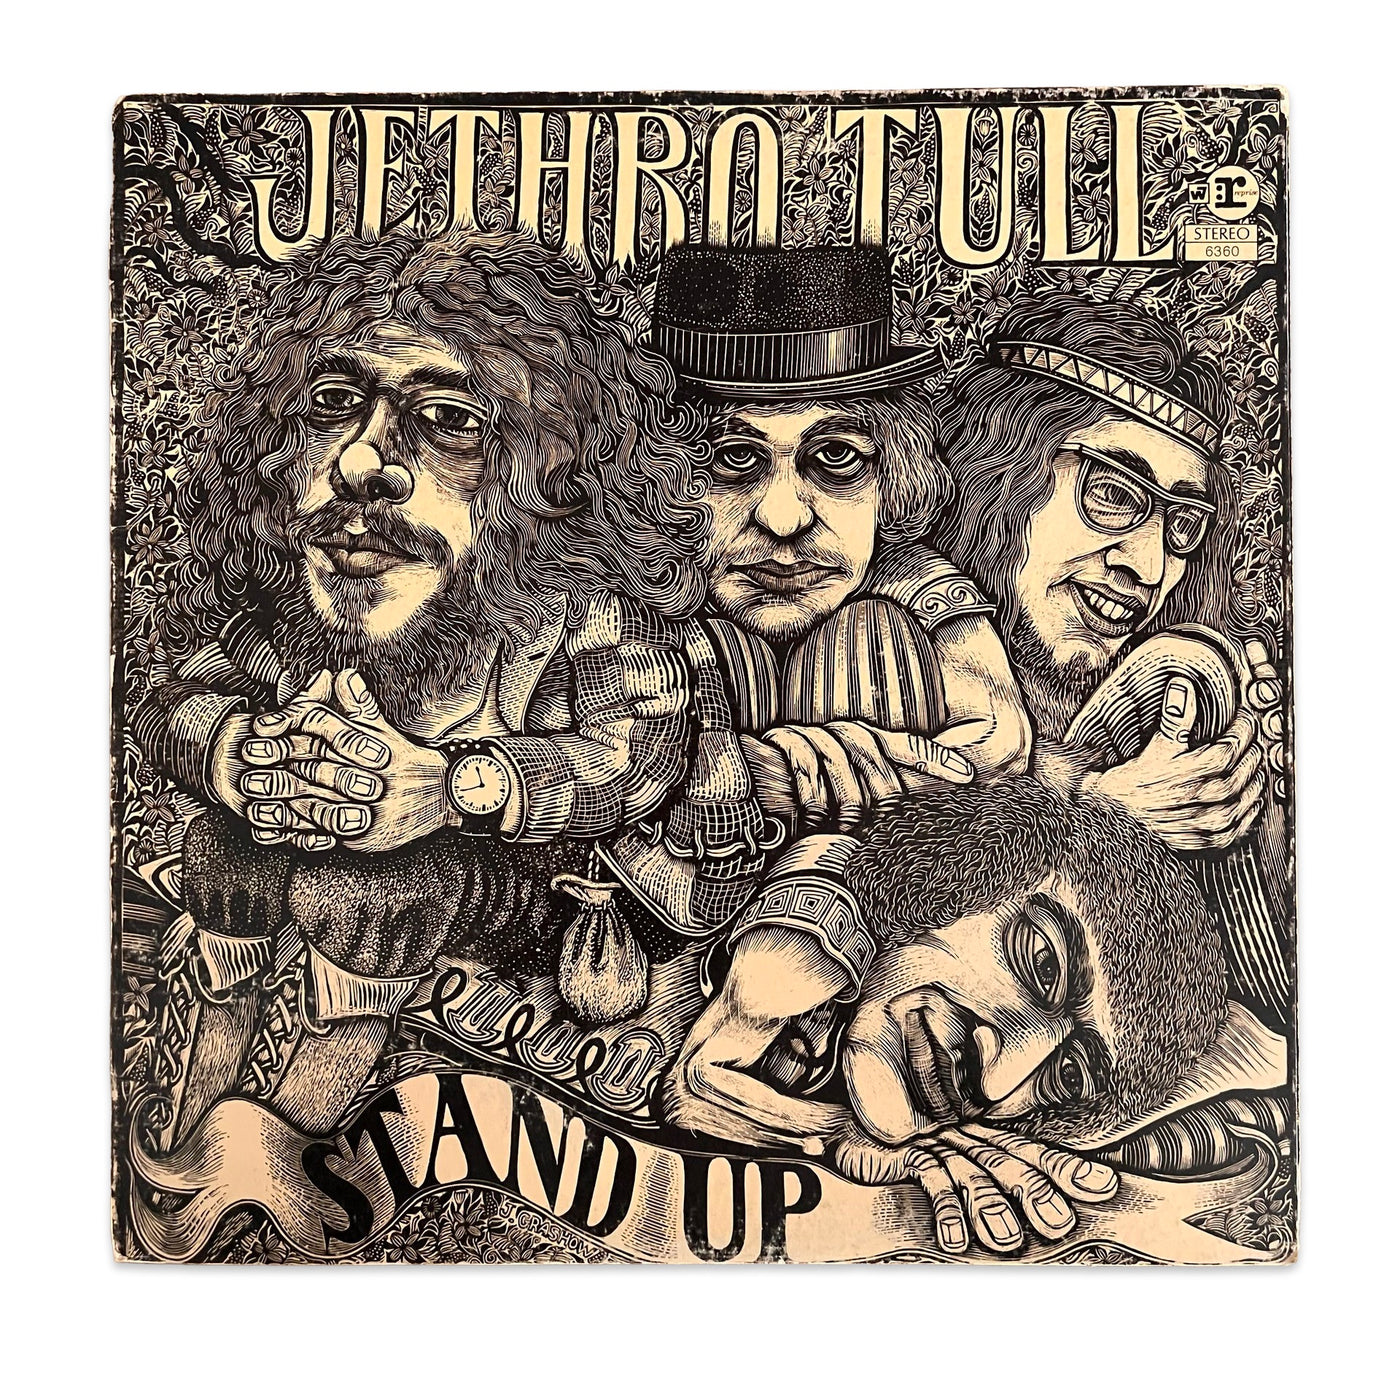 Jethro Tull – Stand Up (1973)